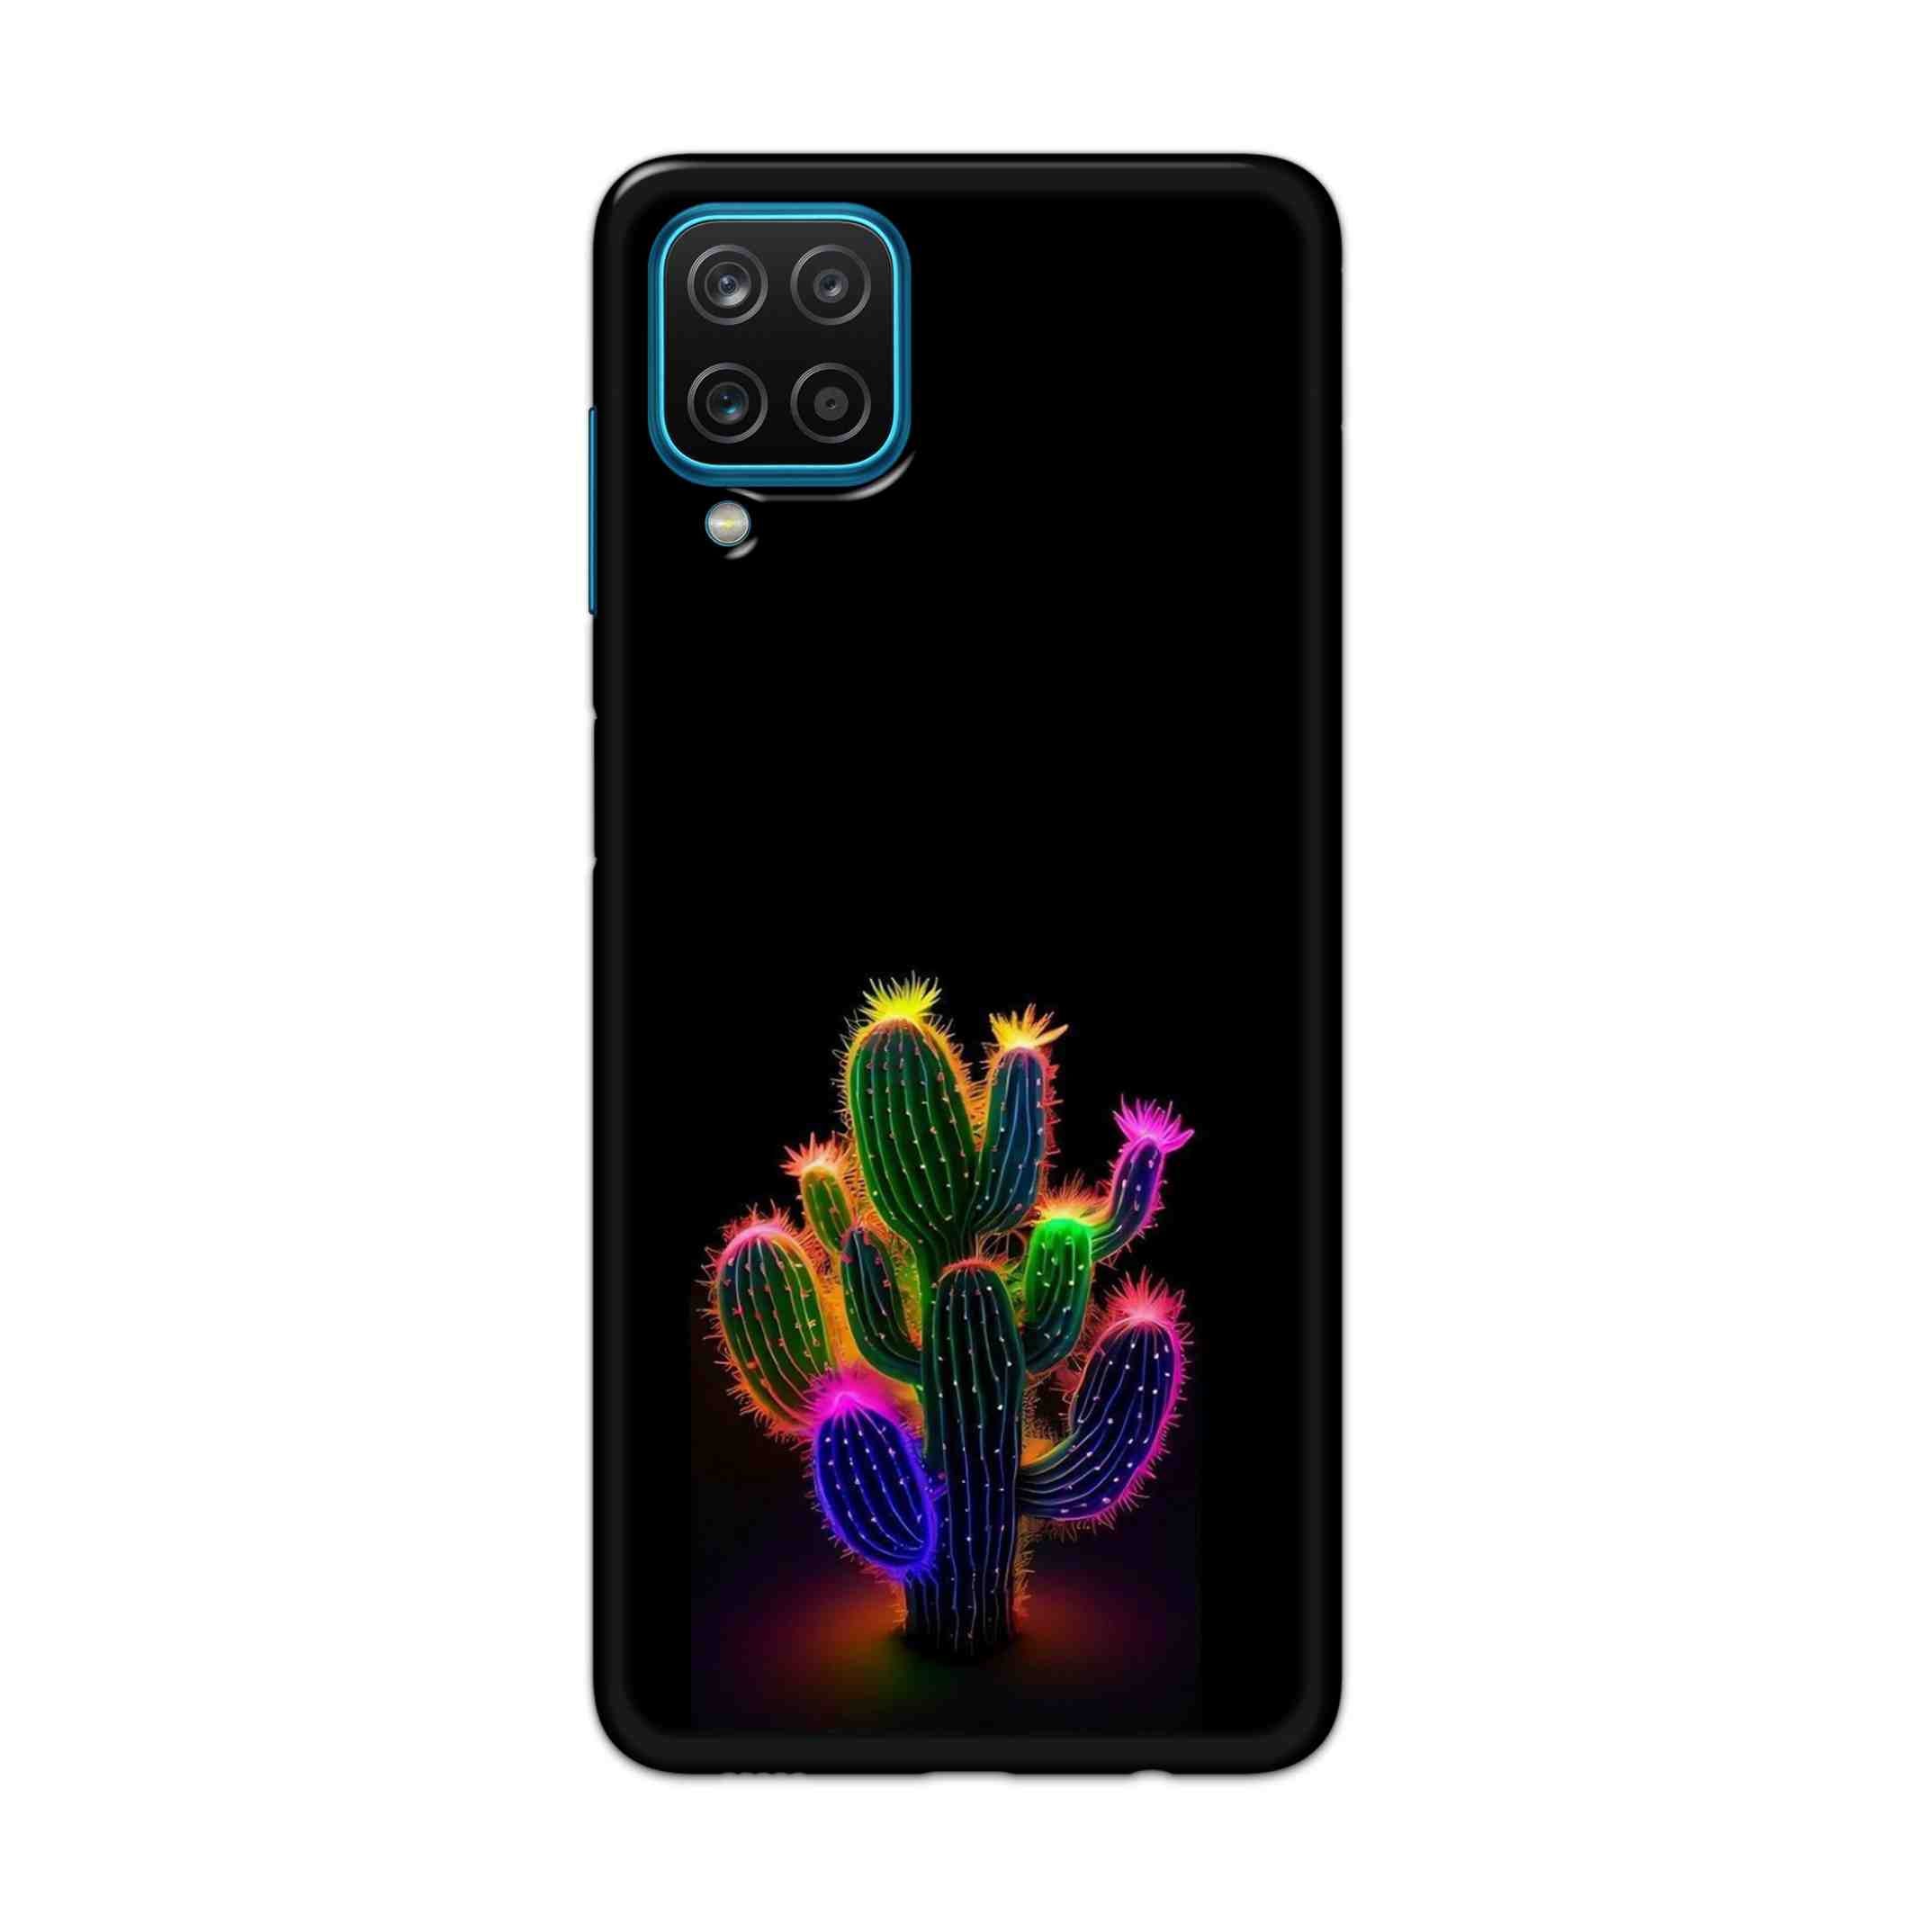 Buy Neon Flower Hard Back Mobile Phone Case Cover For Samsung Galaxy A12 Online